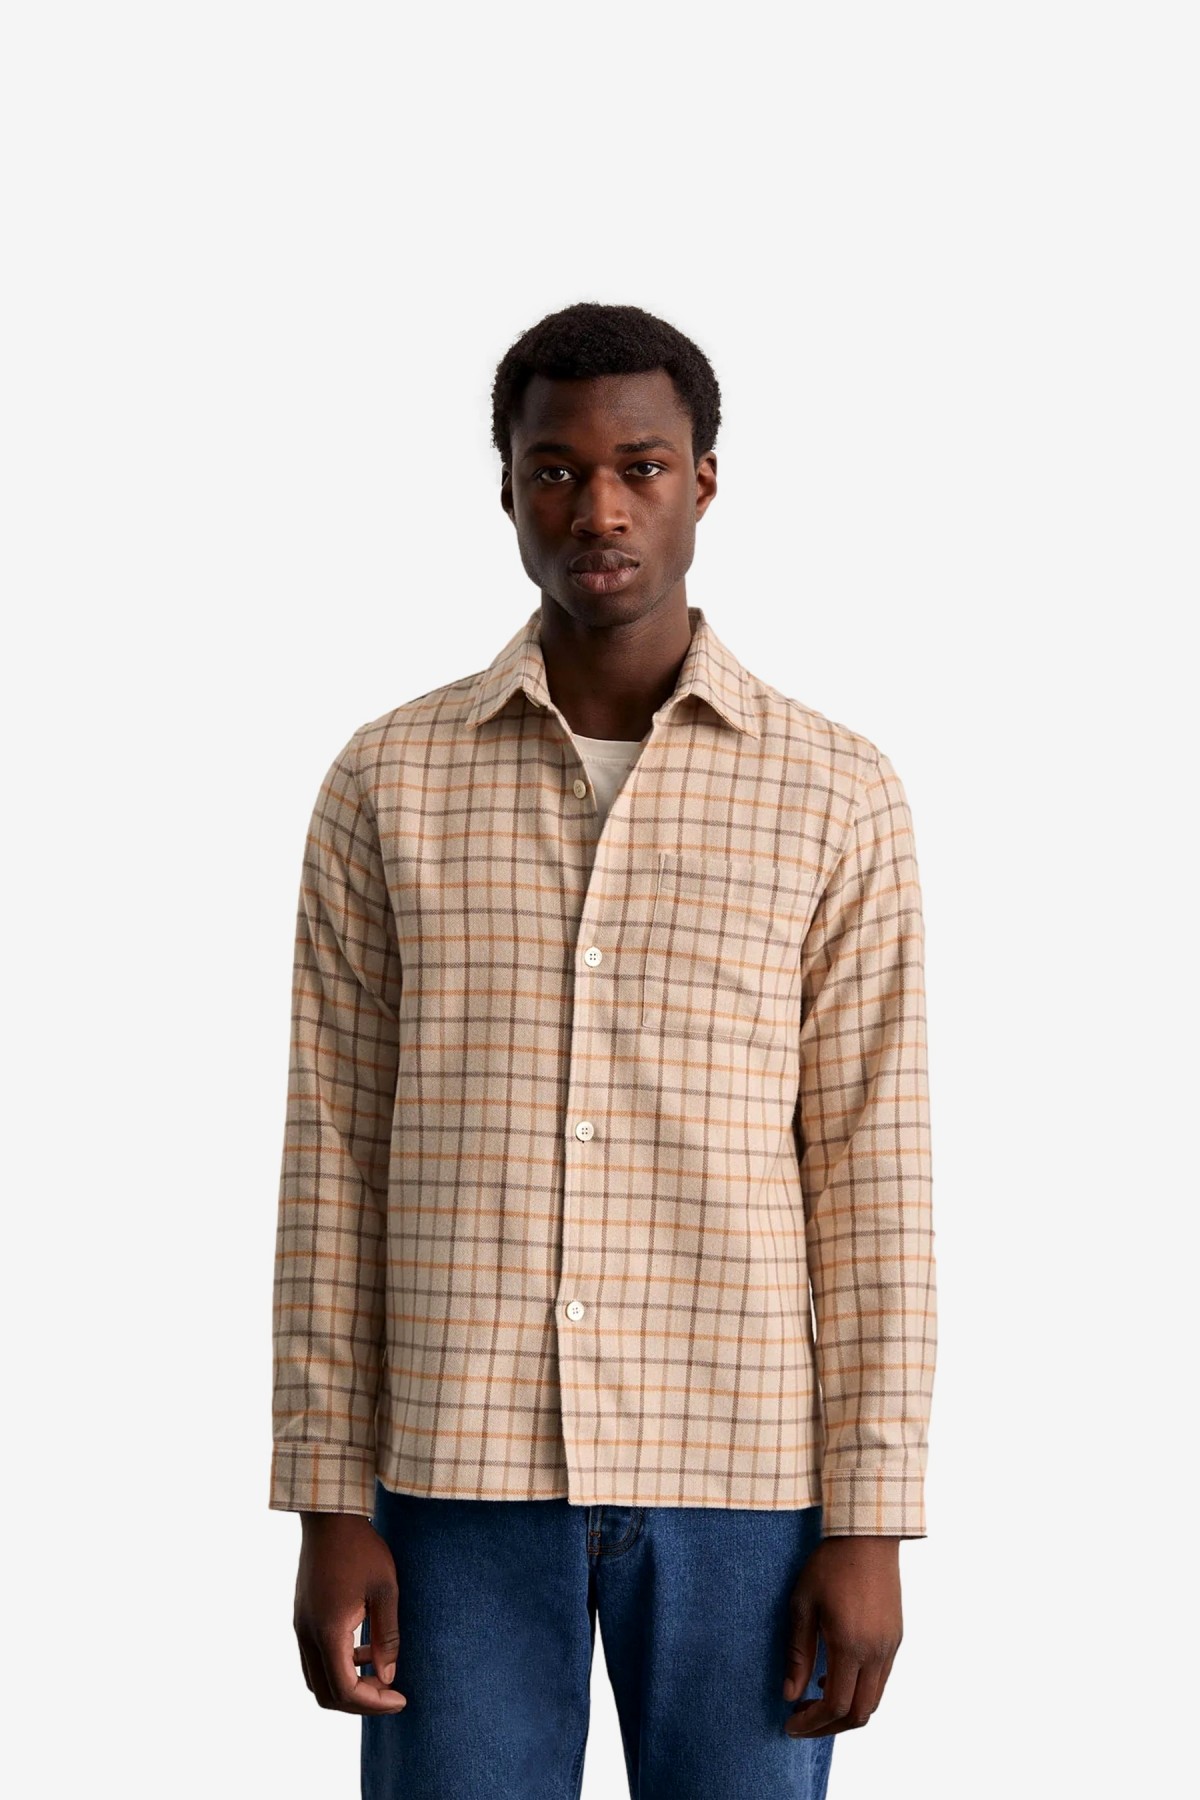 Another Aspect Another Shirt 4.0 in Light Beige Stripe